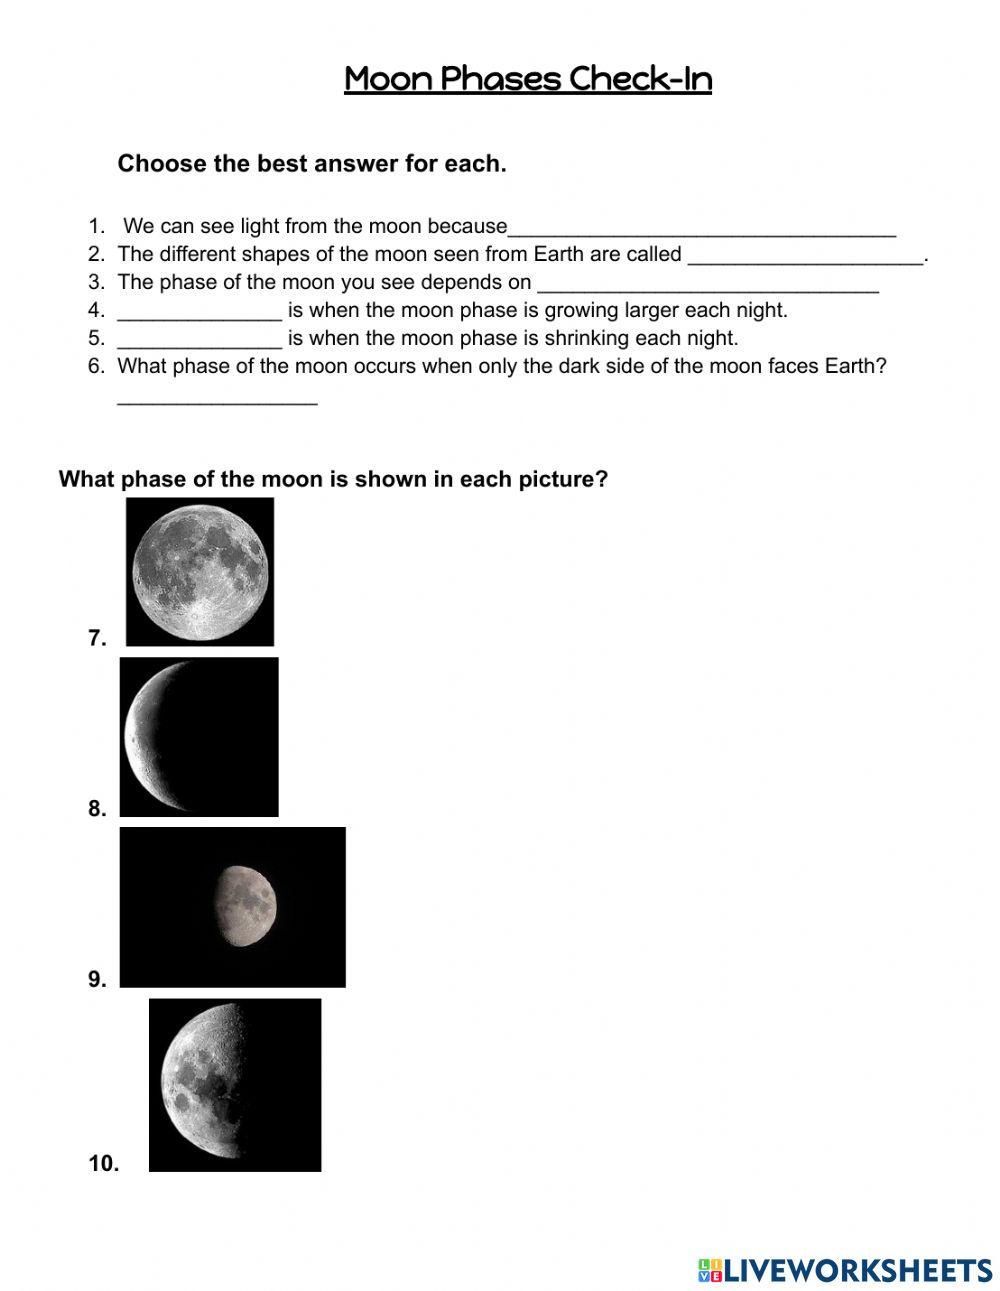 Moon Phases Check-In